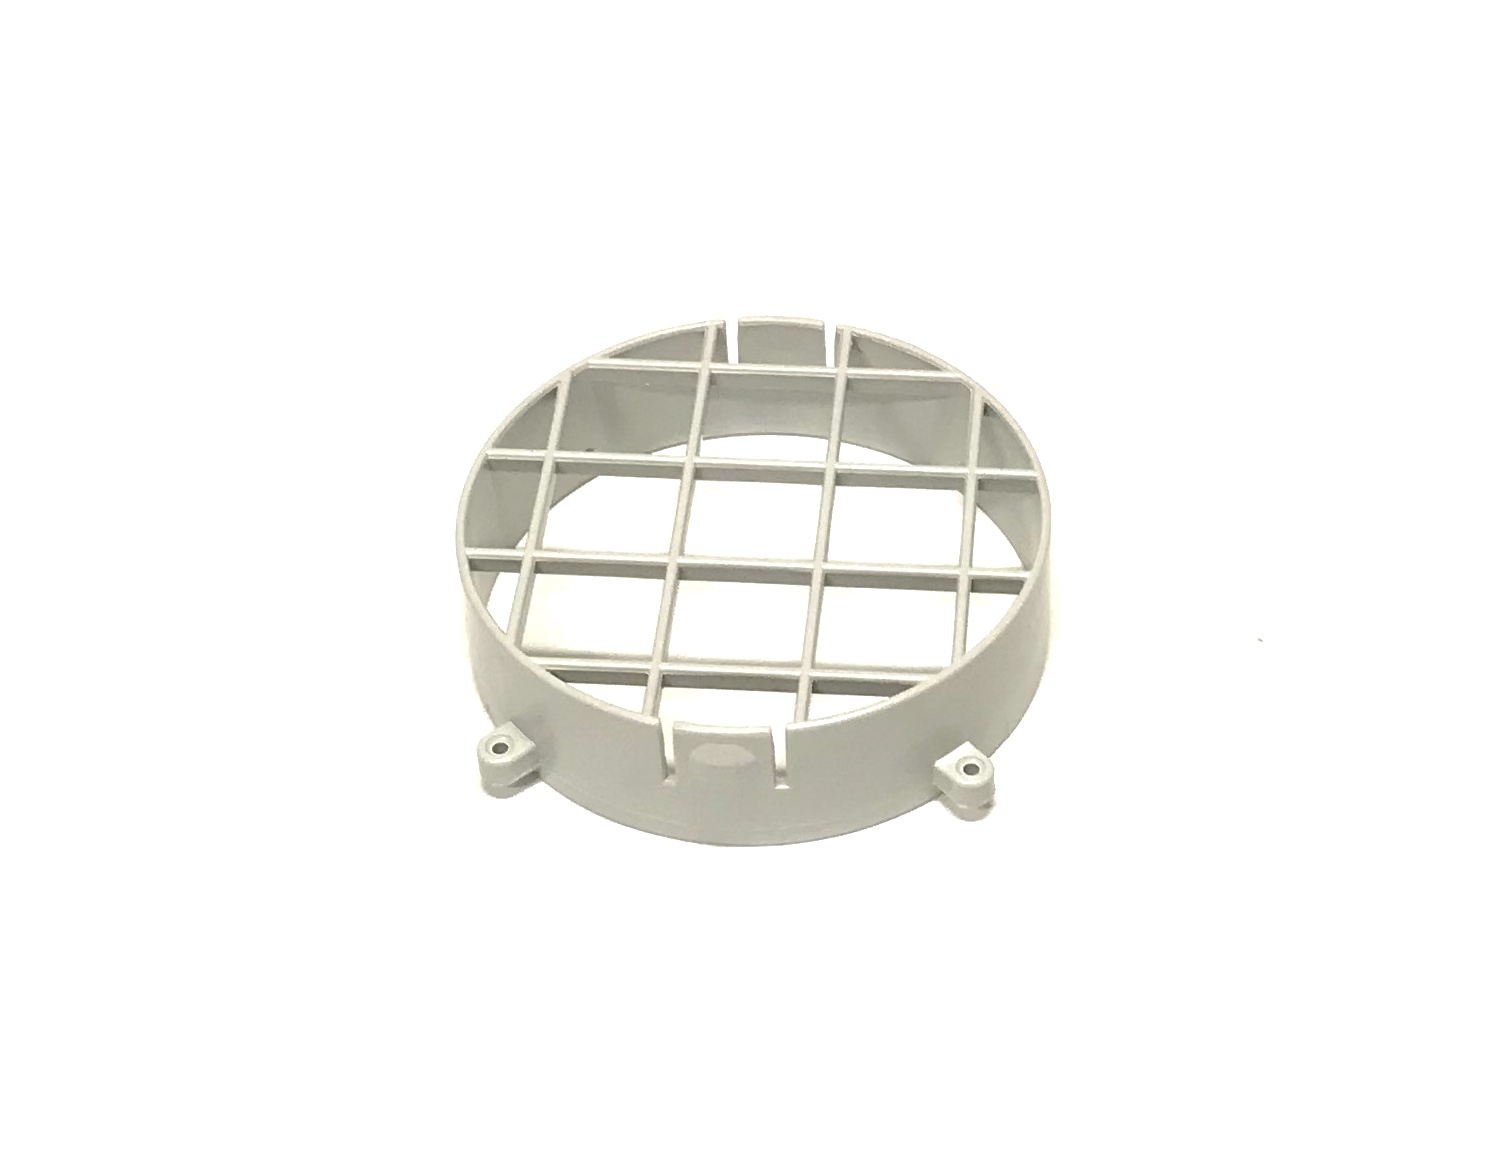 Danby OEM Danby Off White Exhaust Grill Cover Adapter Originally Shipped With DPAC12011, DPAC7099, DPA100A1GA